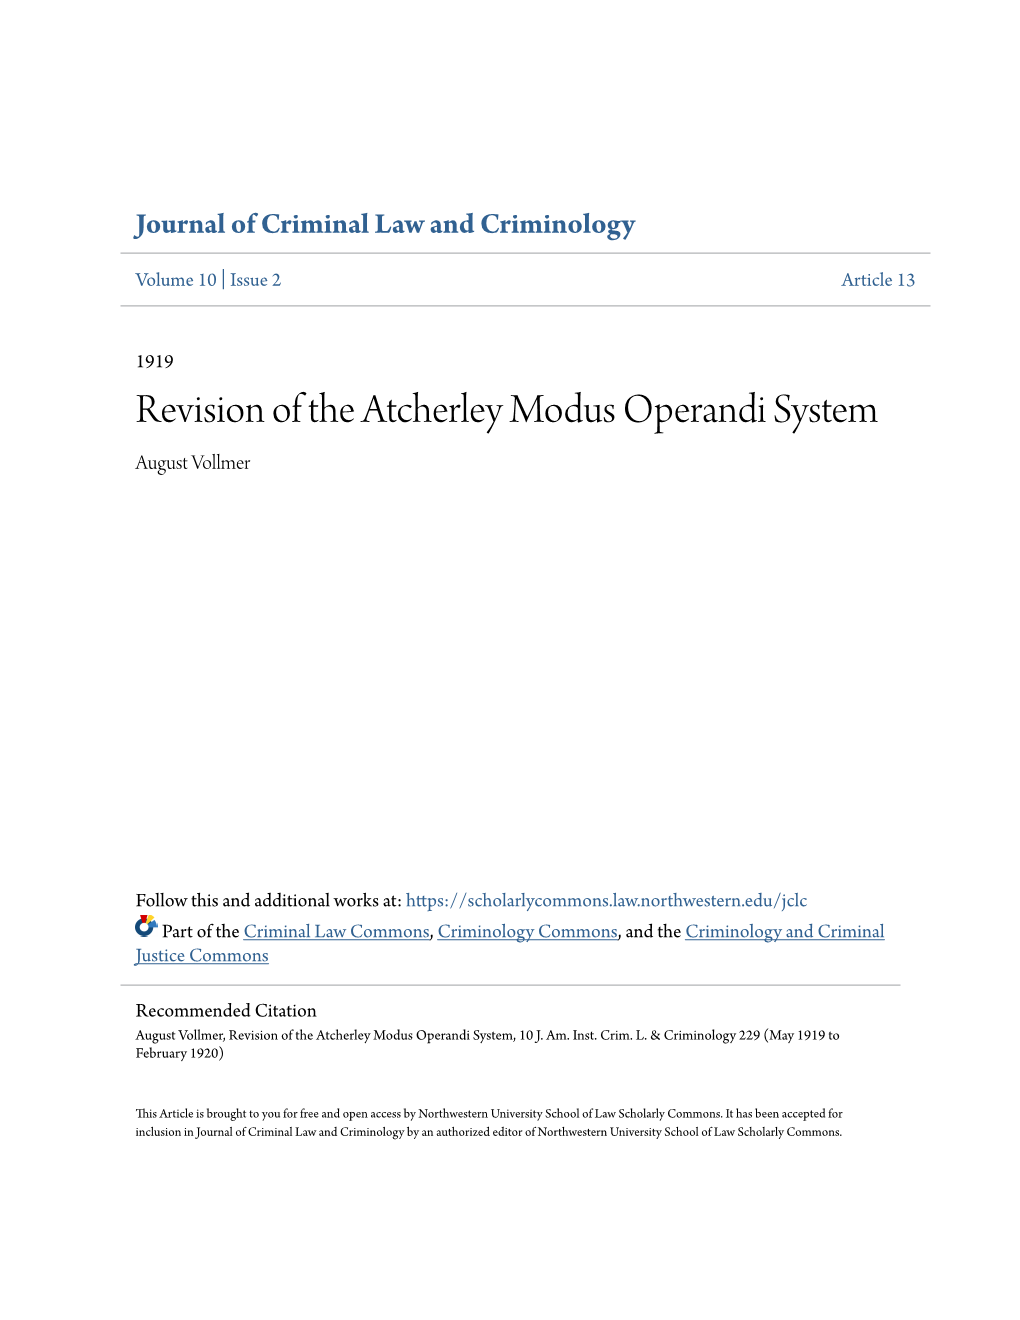 Revision of the Atcherley Modus Operandi System August Vollmer